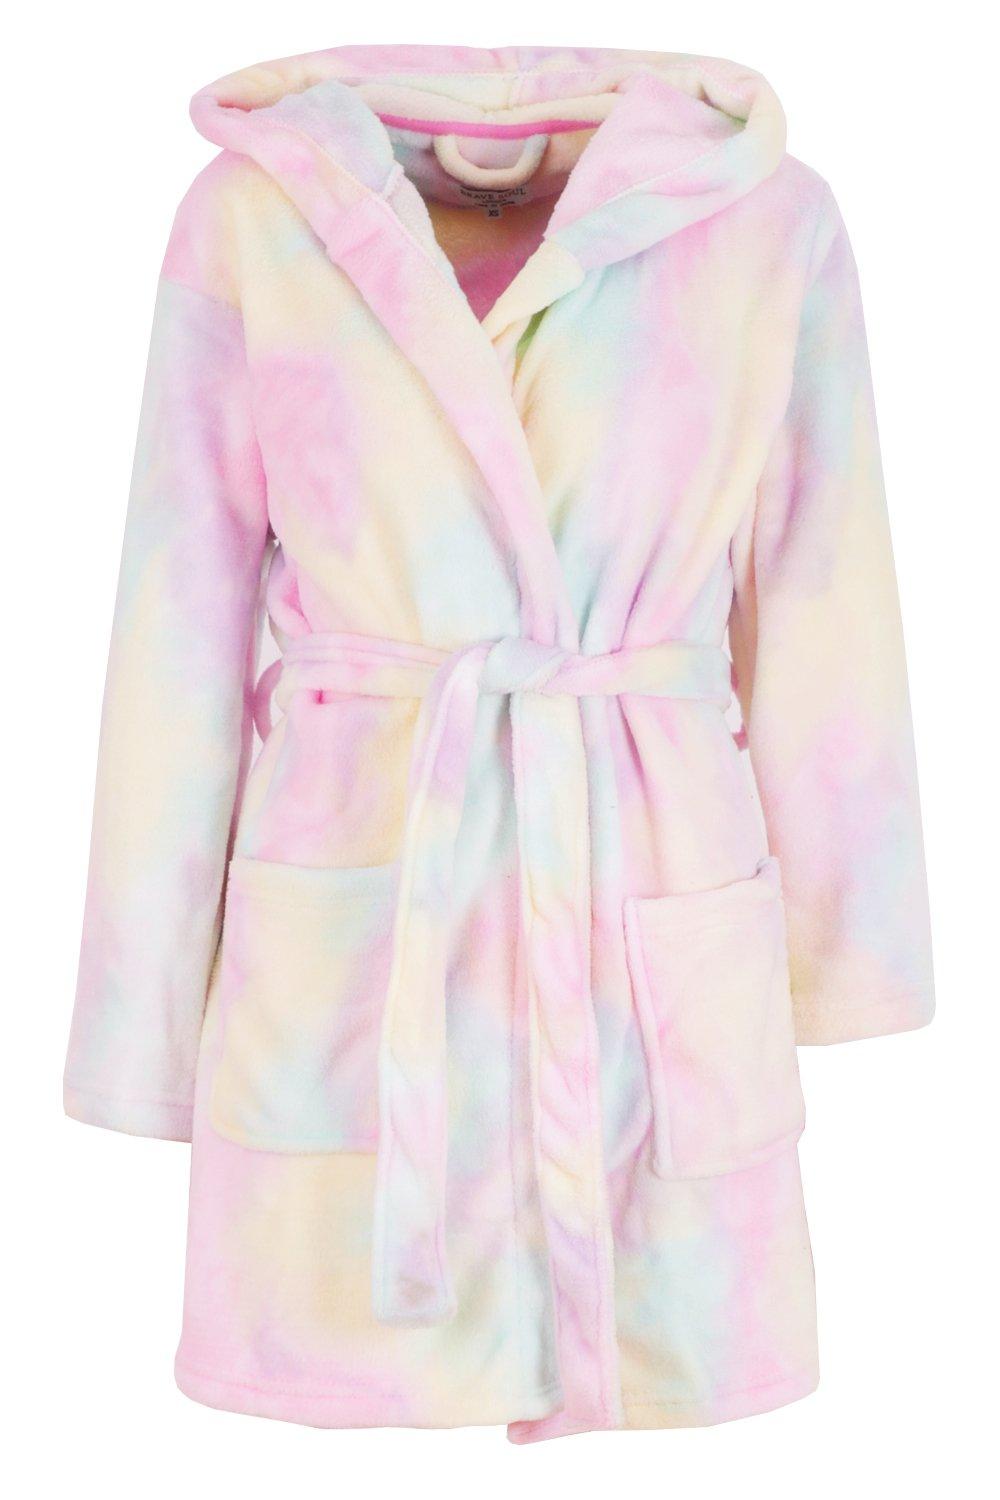 boohoo dressing gown